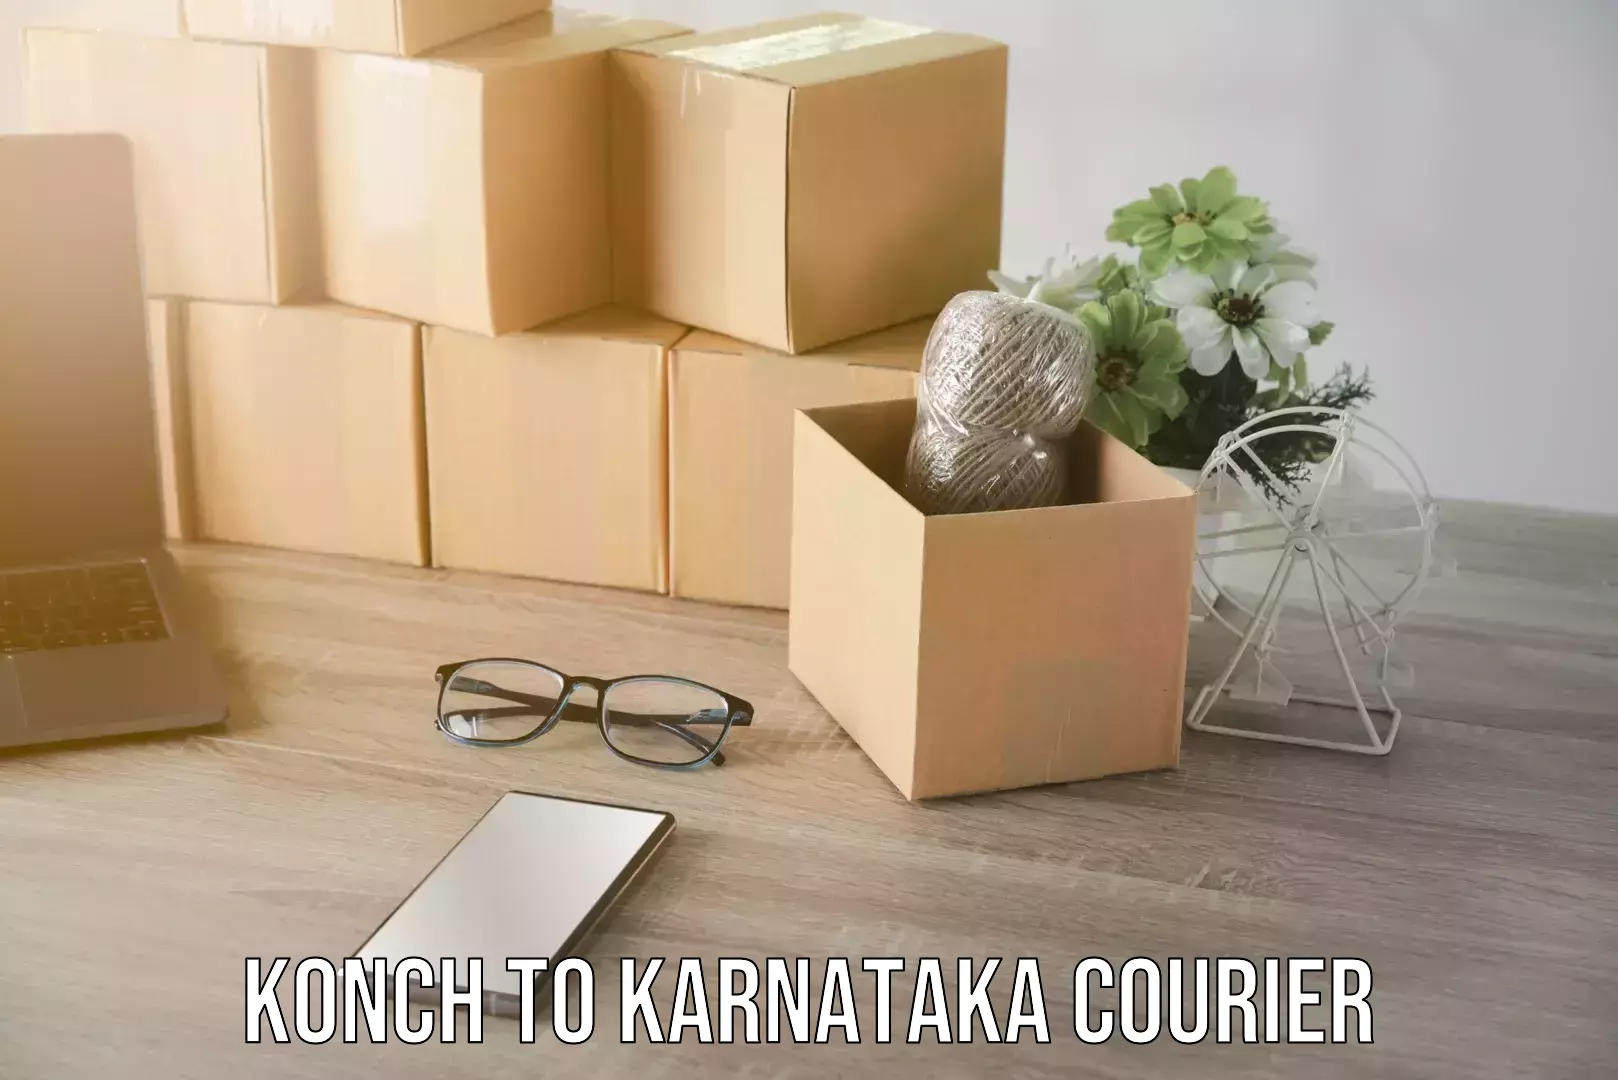 Professional movers and packers Konch to Karnataka